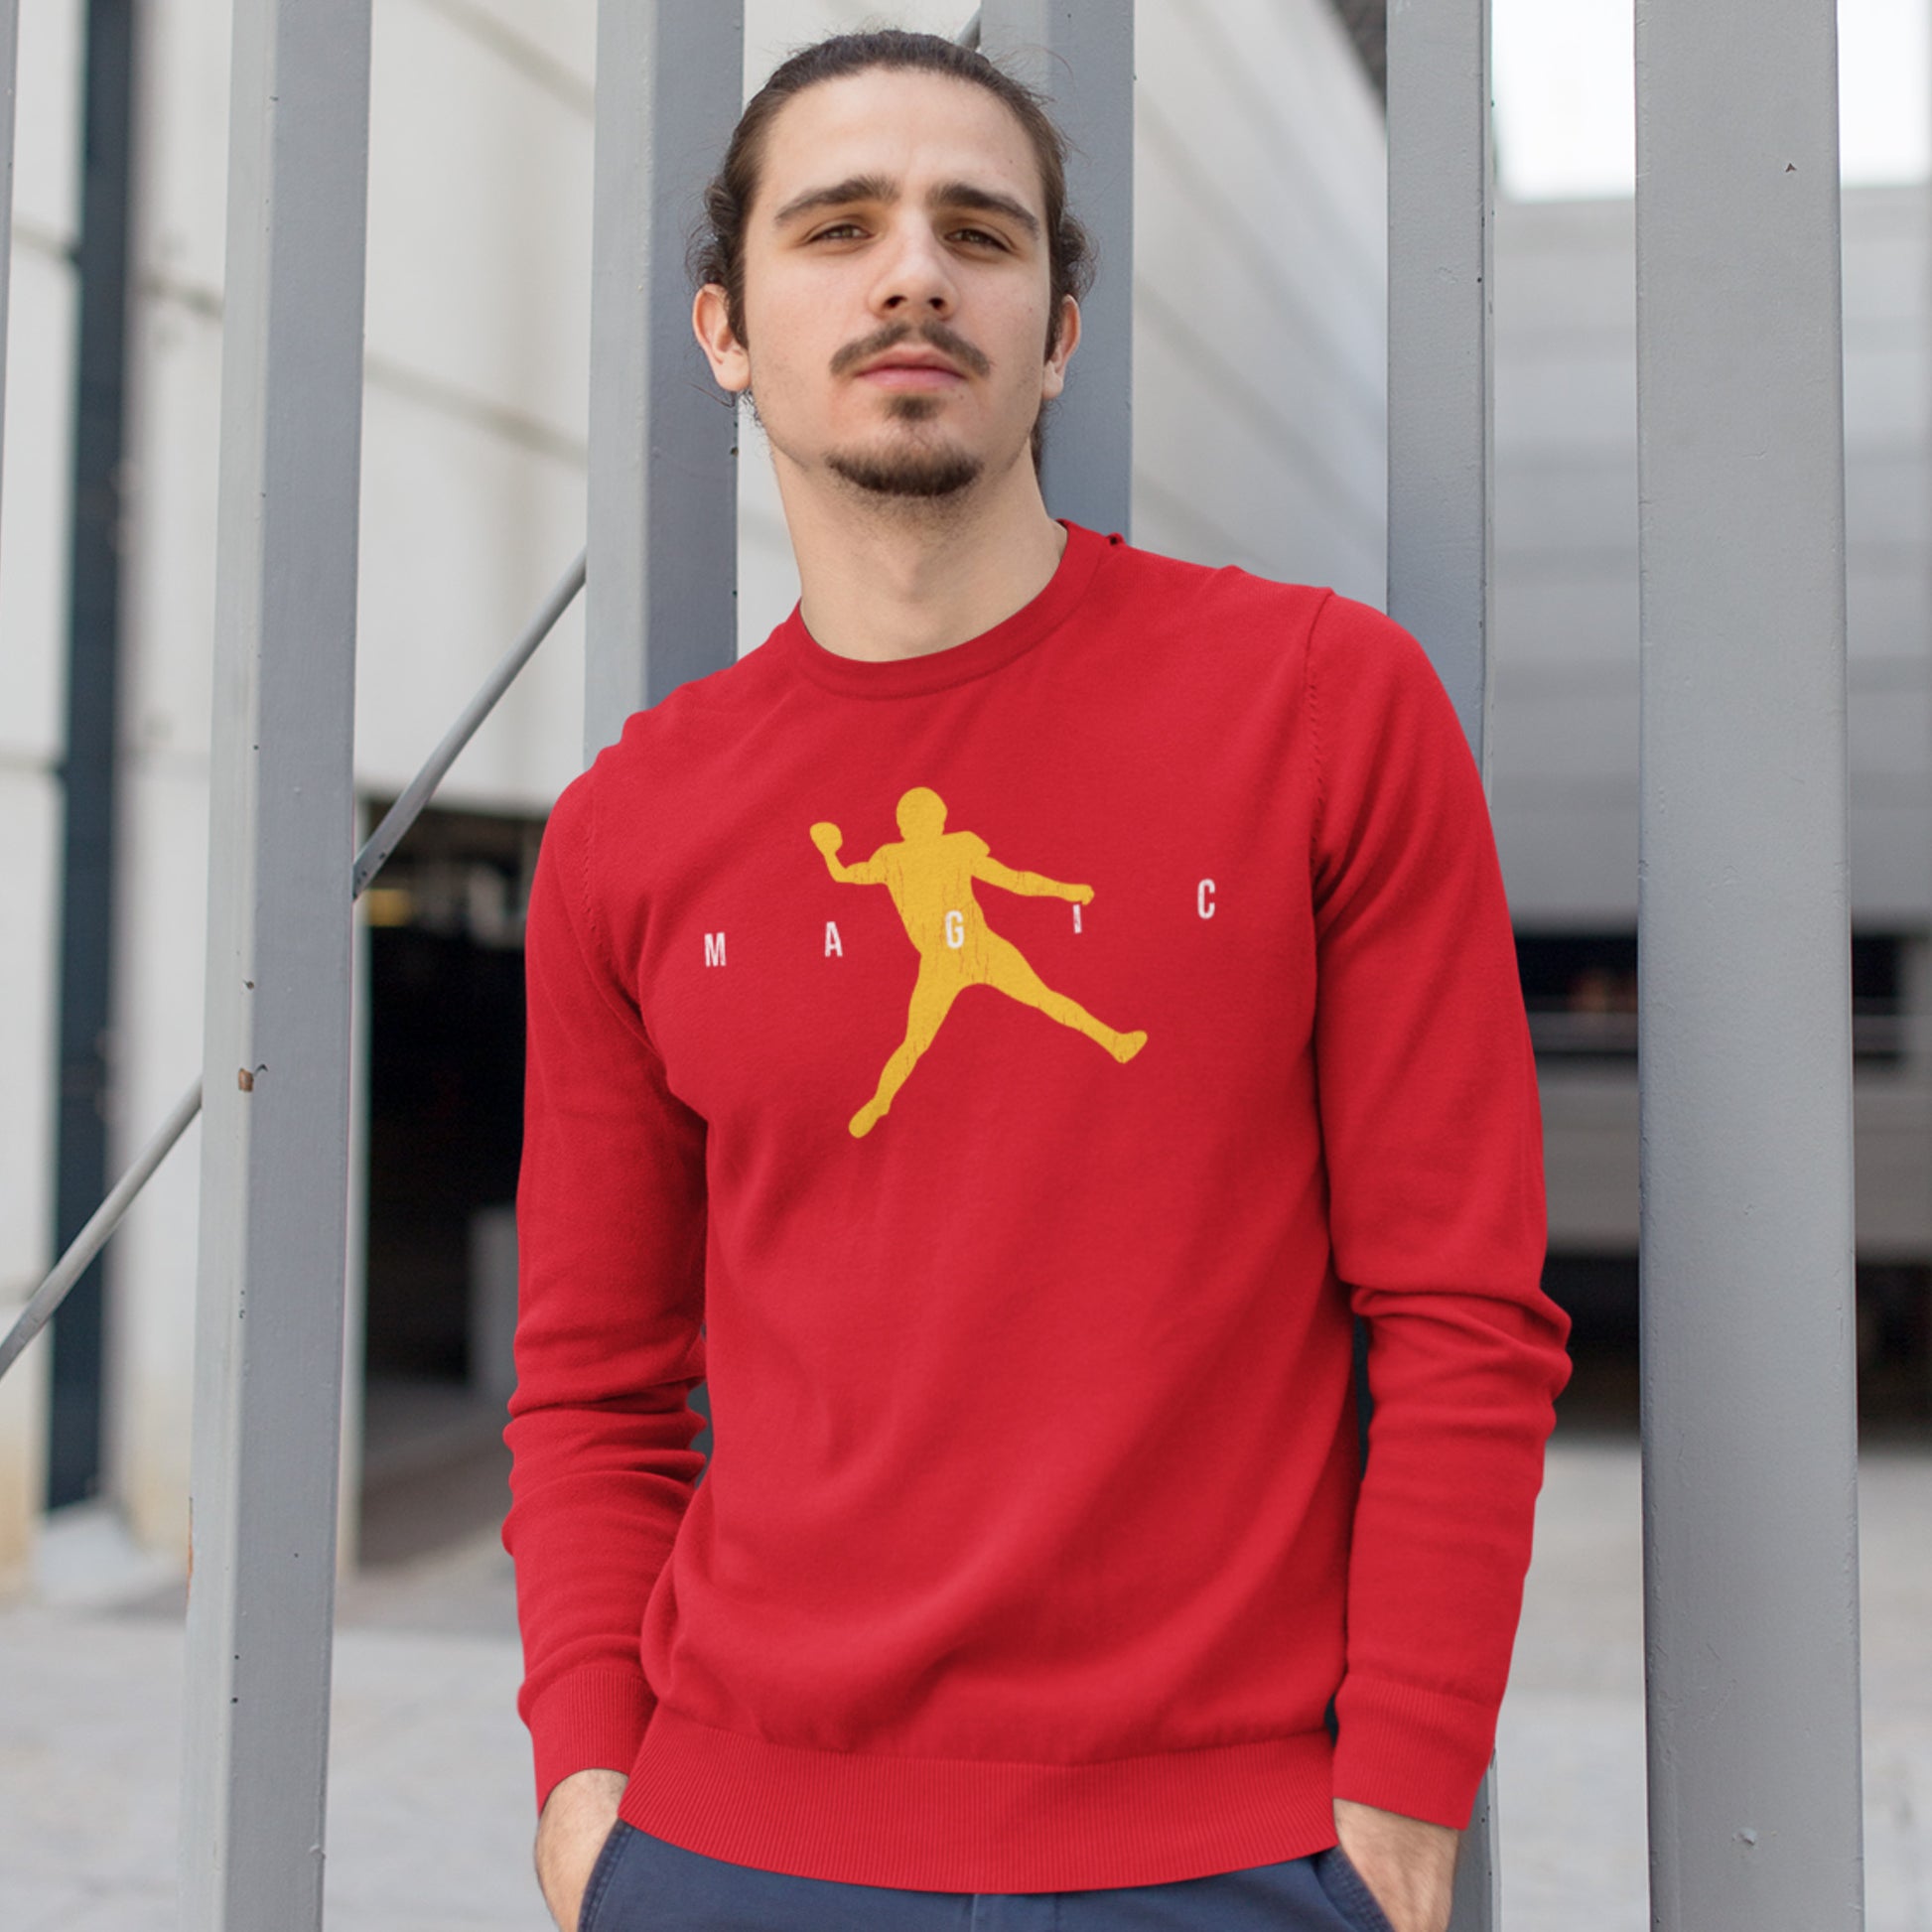 KC Swag Kansas City Chiefs Distressed White & Gold Magic Air Mahomie on a Red Crewneck Sweatshirt worn by male model with a goatee leaning against a large metal gate